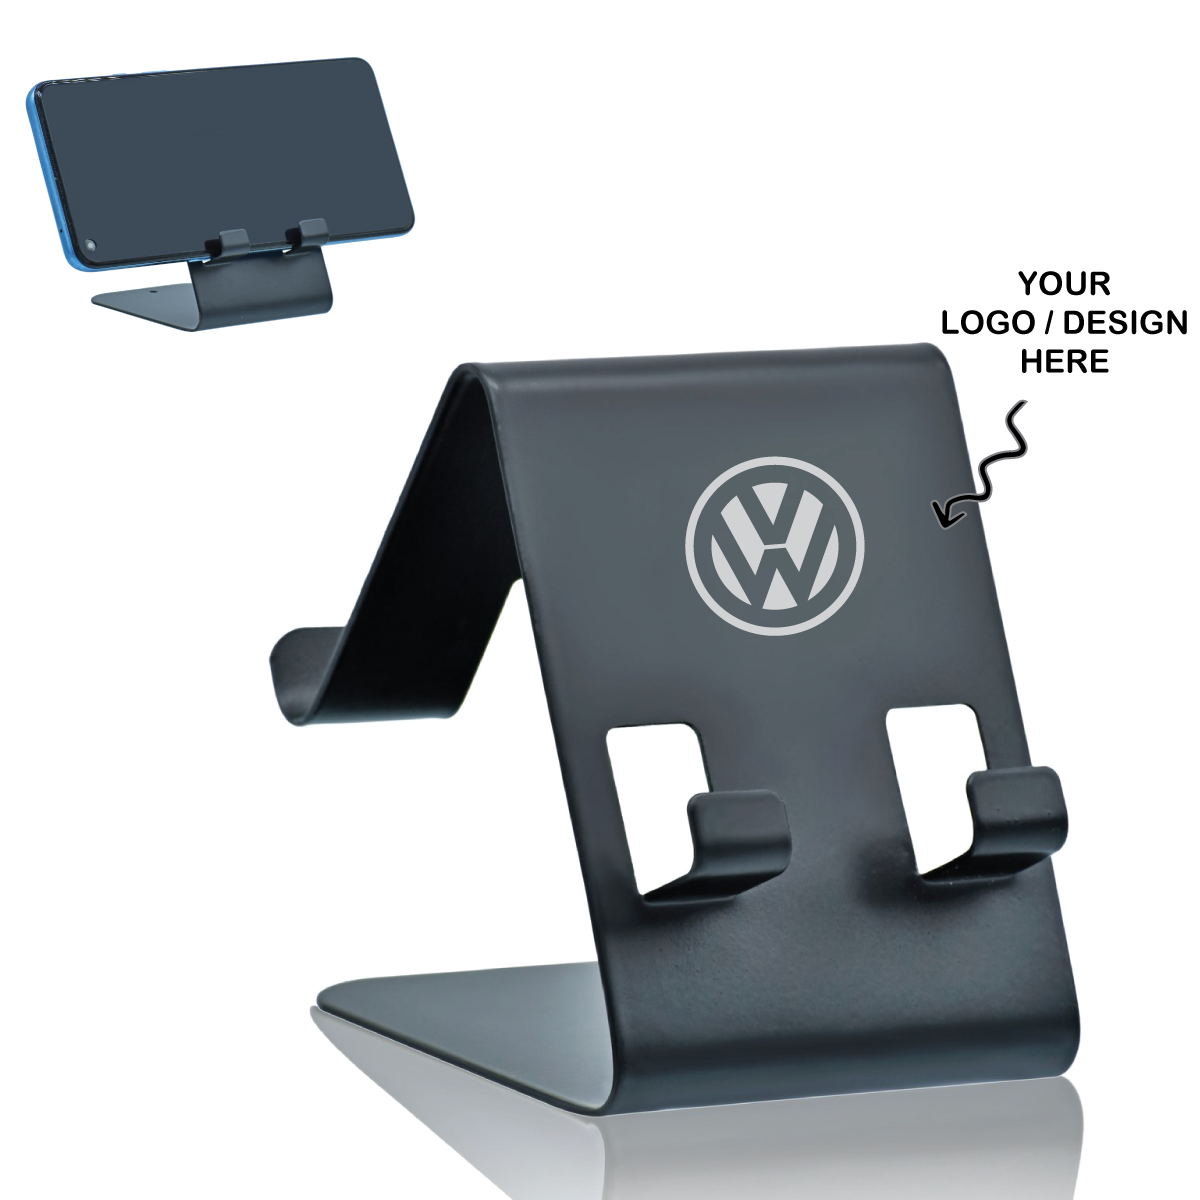 Personalized Metal Dual Side Phone Holder Mobile Stand - For Personal, Corporate Gifting, Return Gift, Event Gifting, Promotional Freebies JAMHMM00